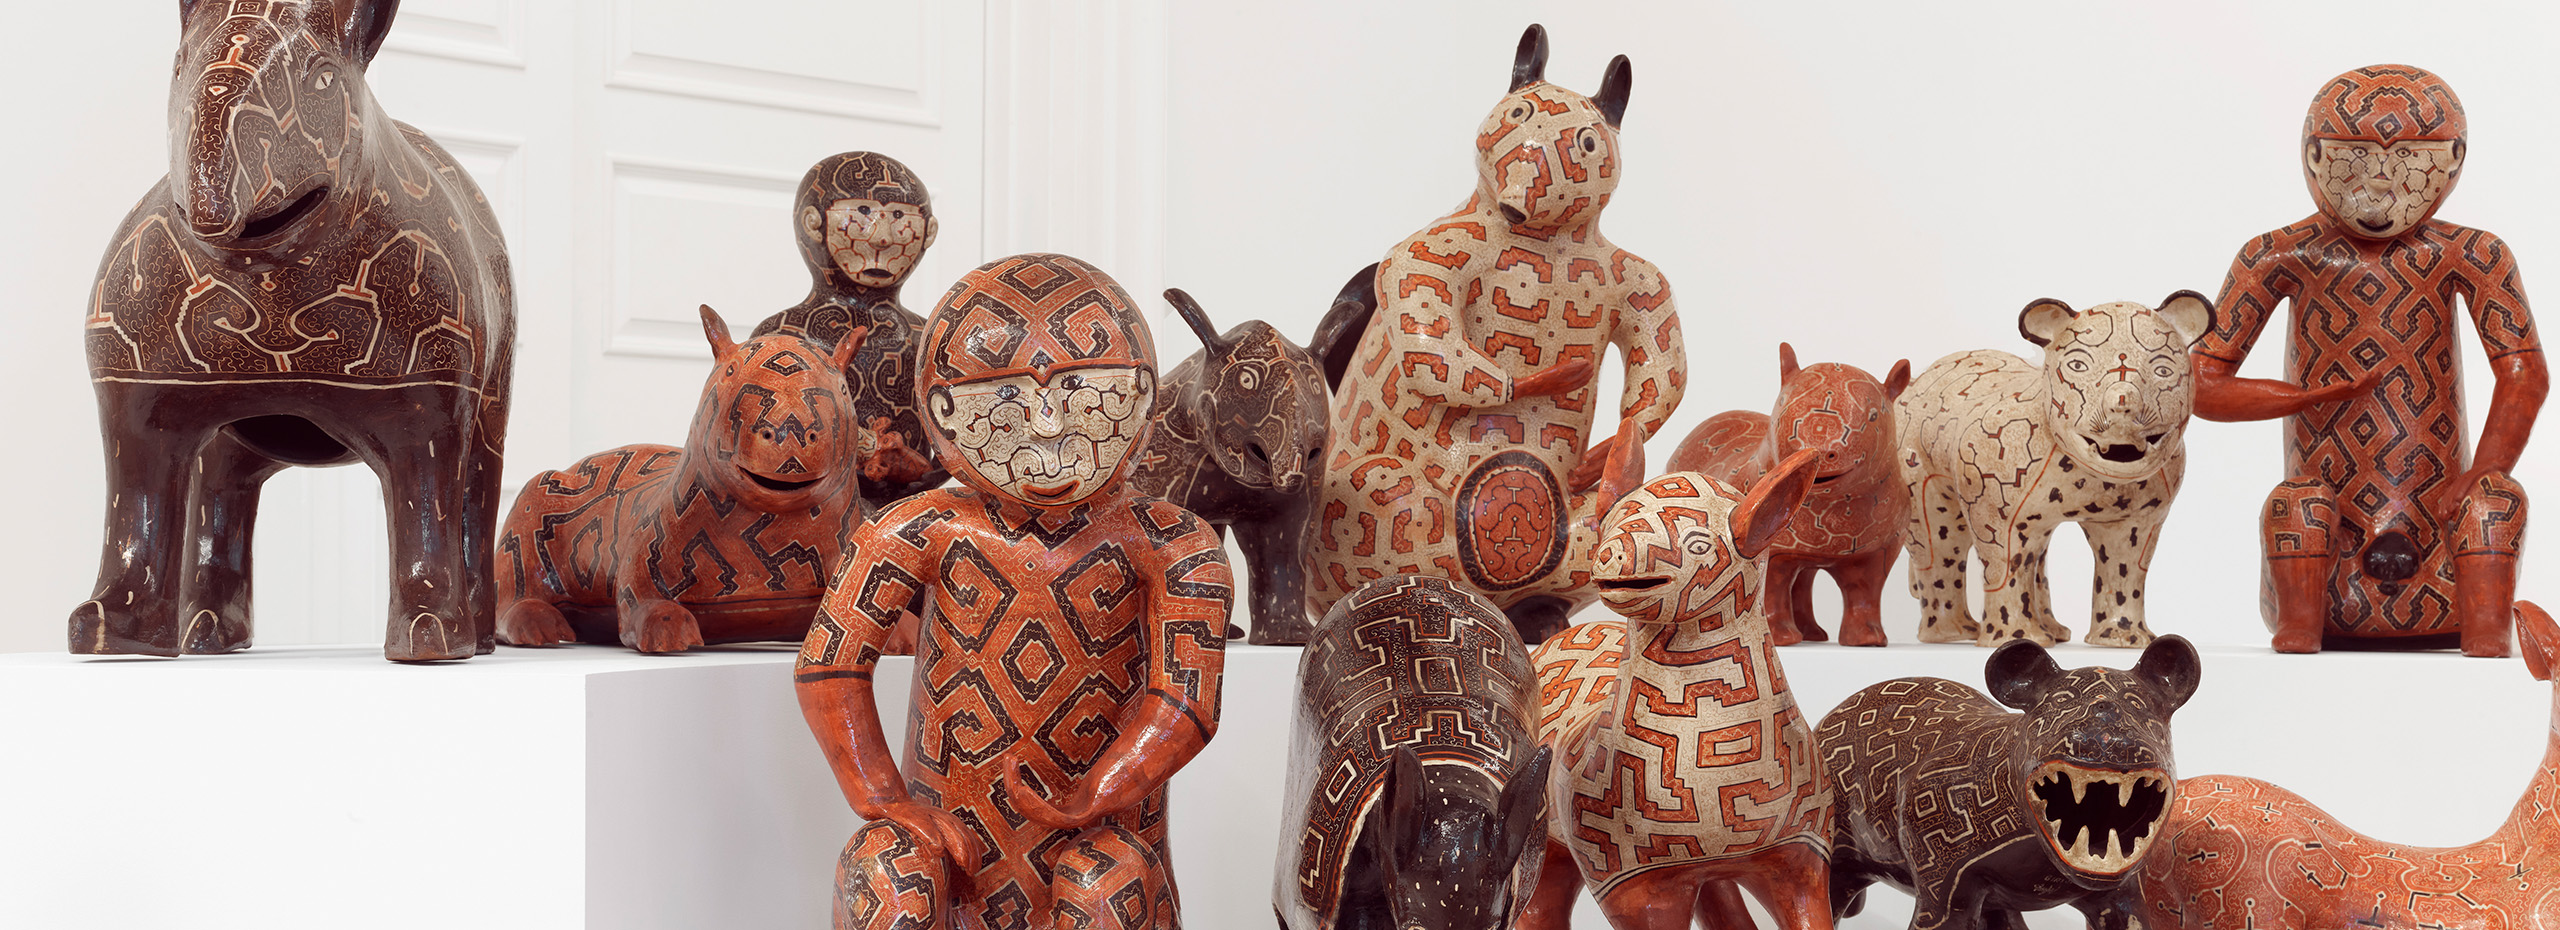 Two rows of different ceramic animal figures